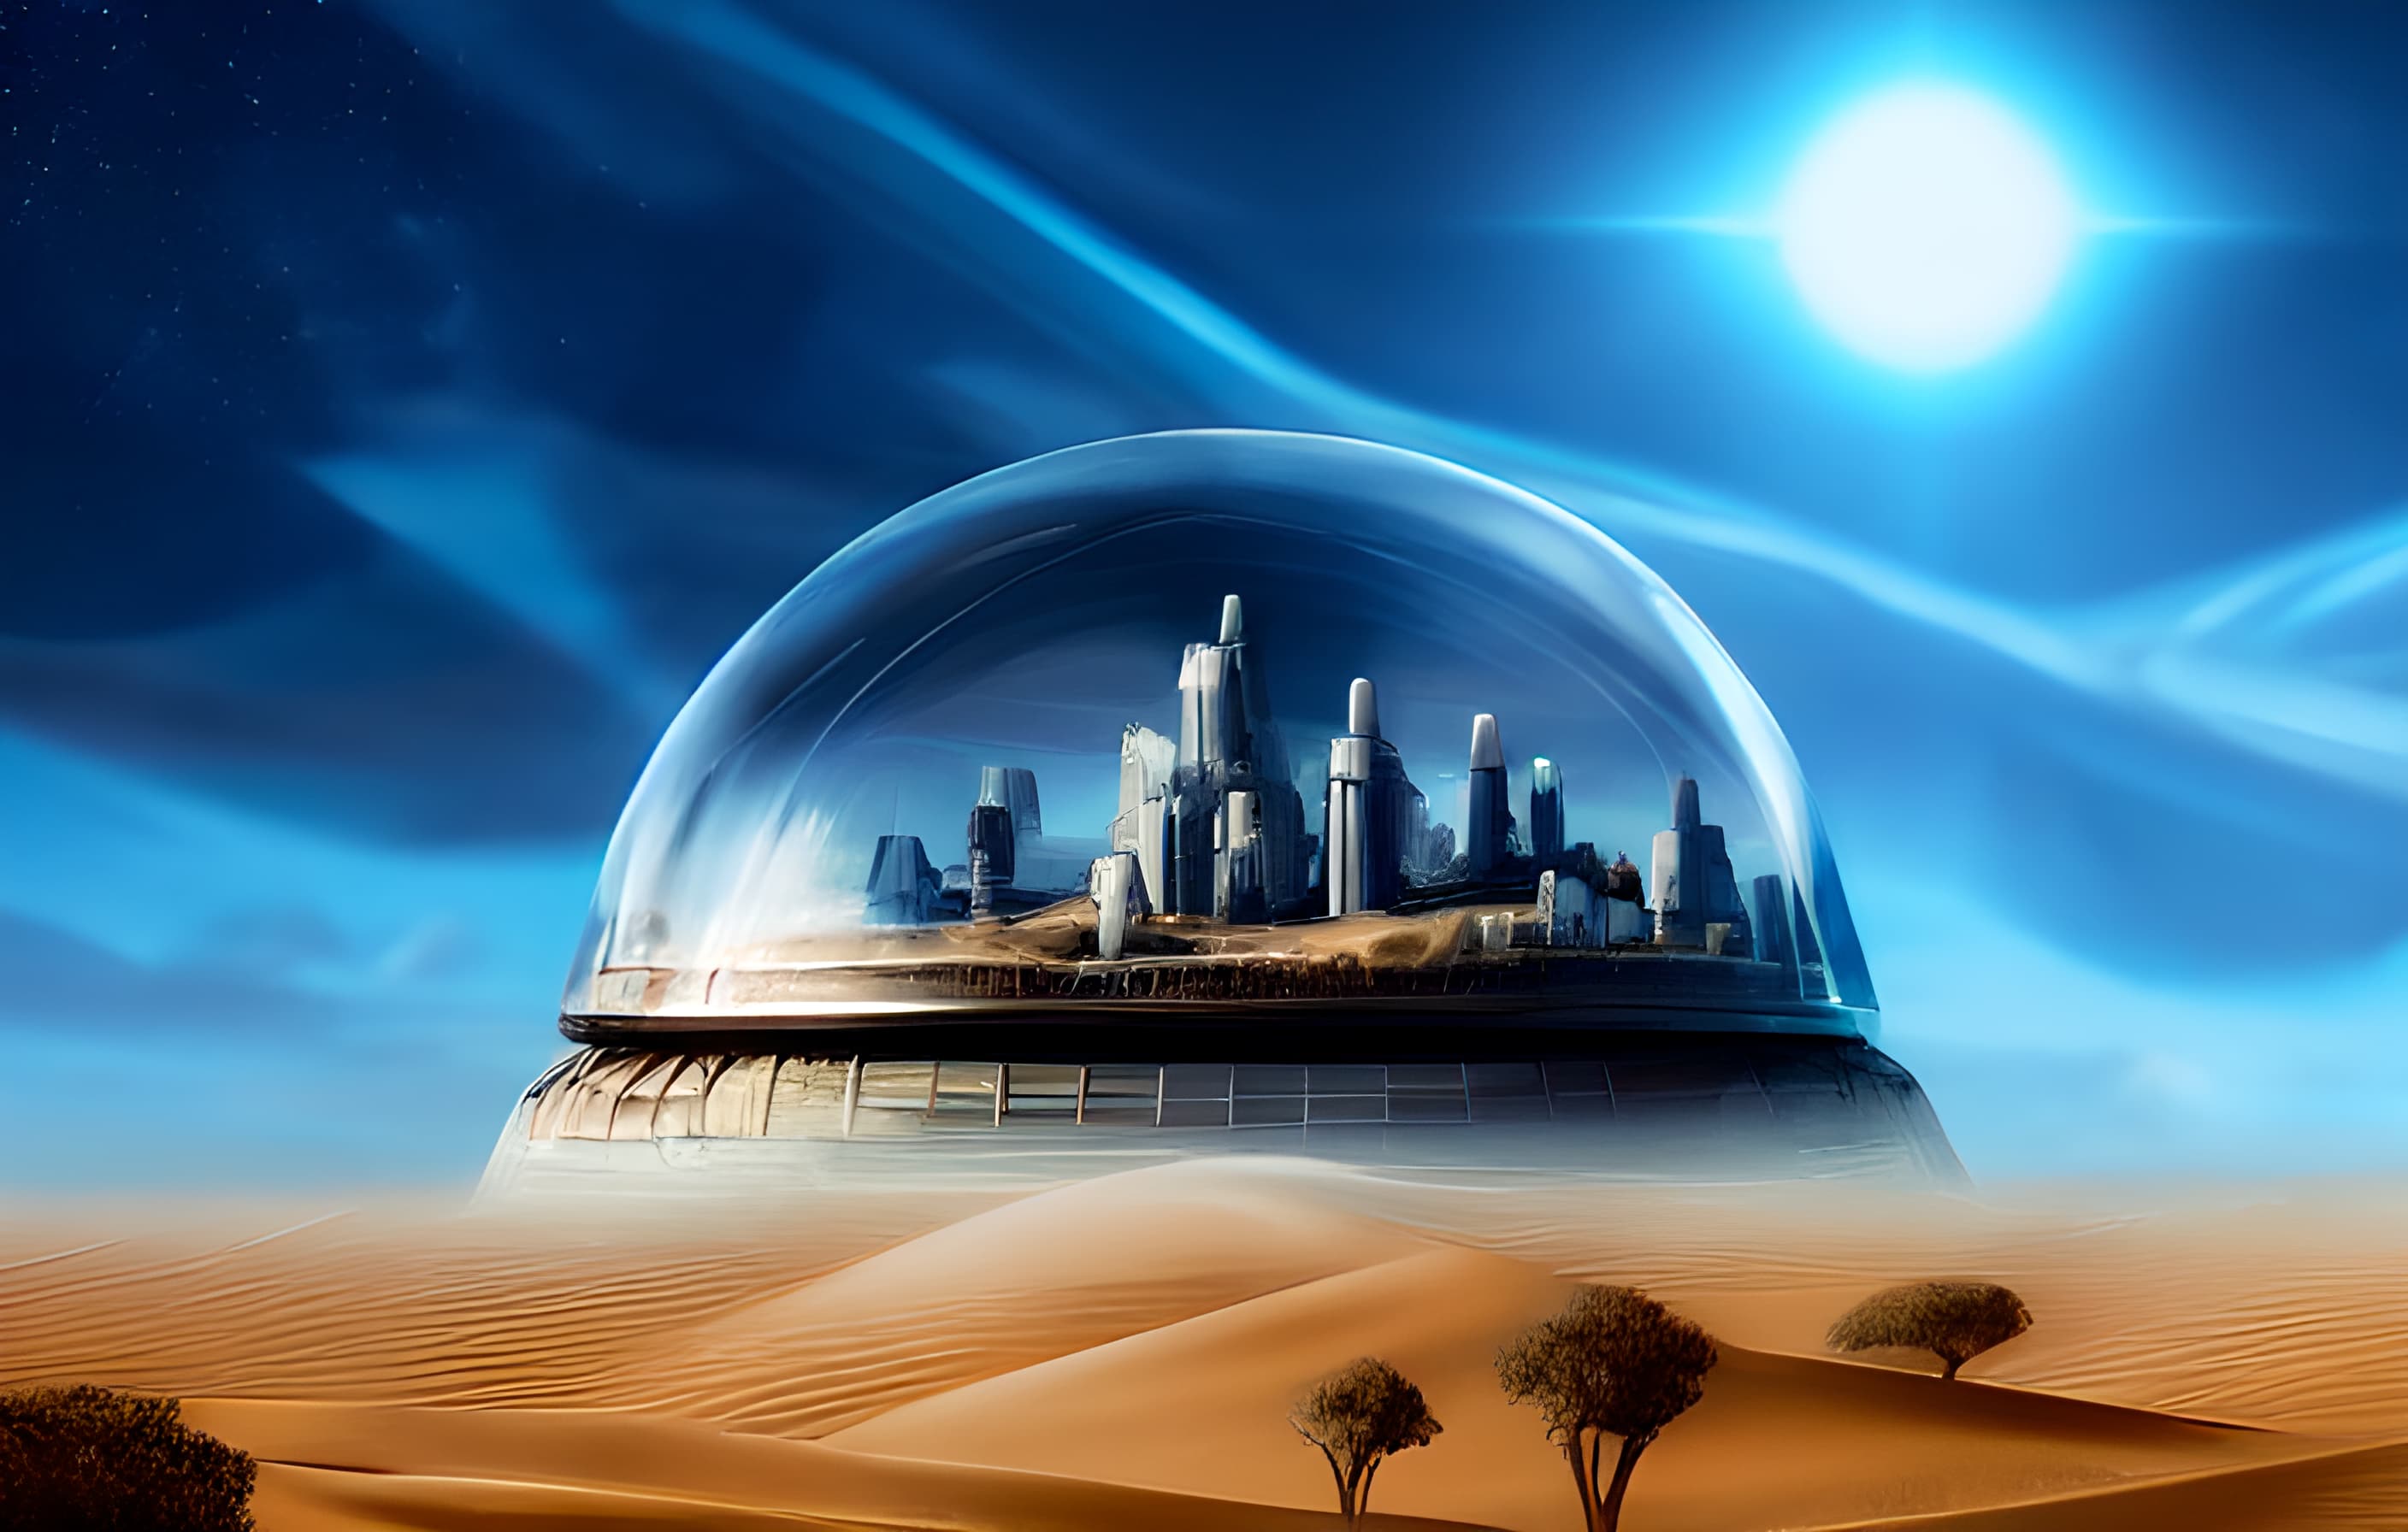 A gorgeous image of a futuristic city under a glass domb, in front of a wind-swept desert. The composition matches the Microsoft Paint input, but everything is rendered in great detail.